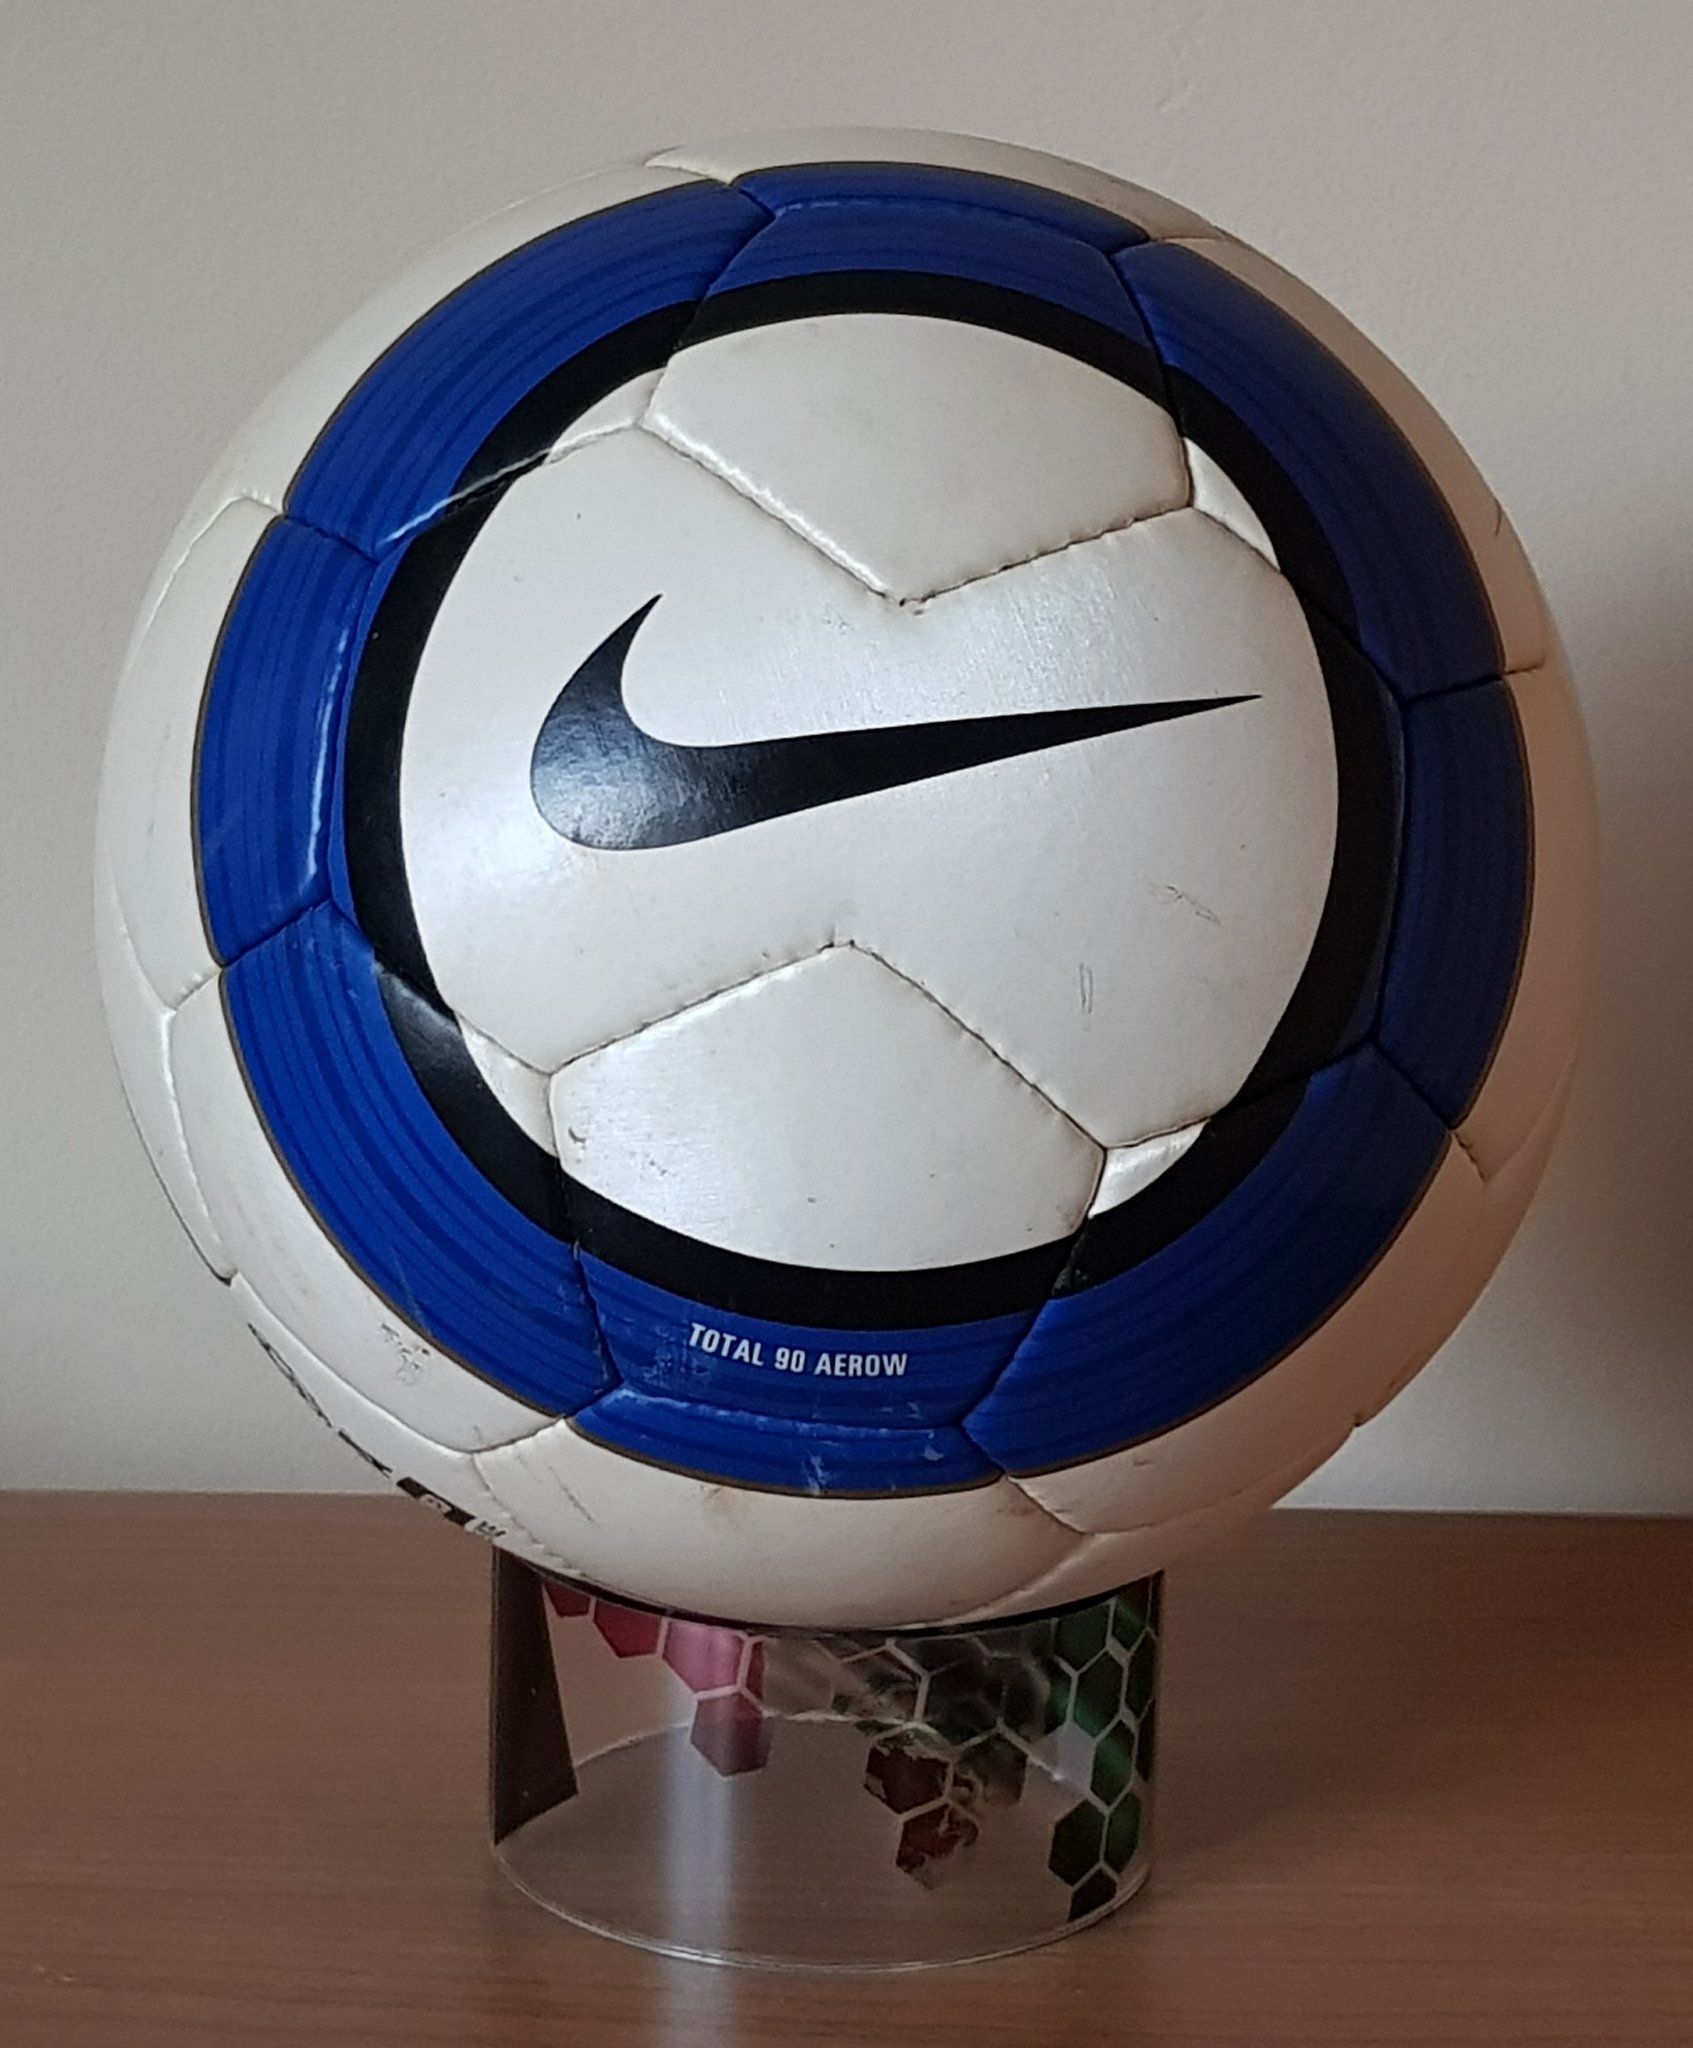 Rob Filby on Twitter: "Nike Total 90 Aerow English Barclays League Official Match Ball 2004/5 - Used #epl #niketotal90 #omb #90sfootball https://t.co/KxfXuJMMJD" / Twitter